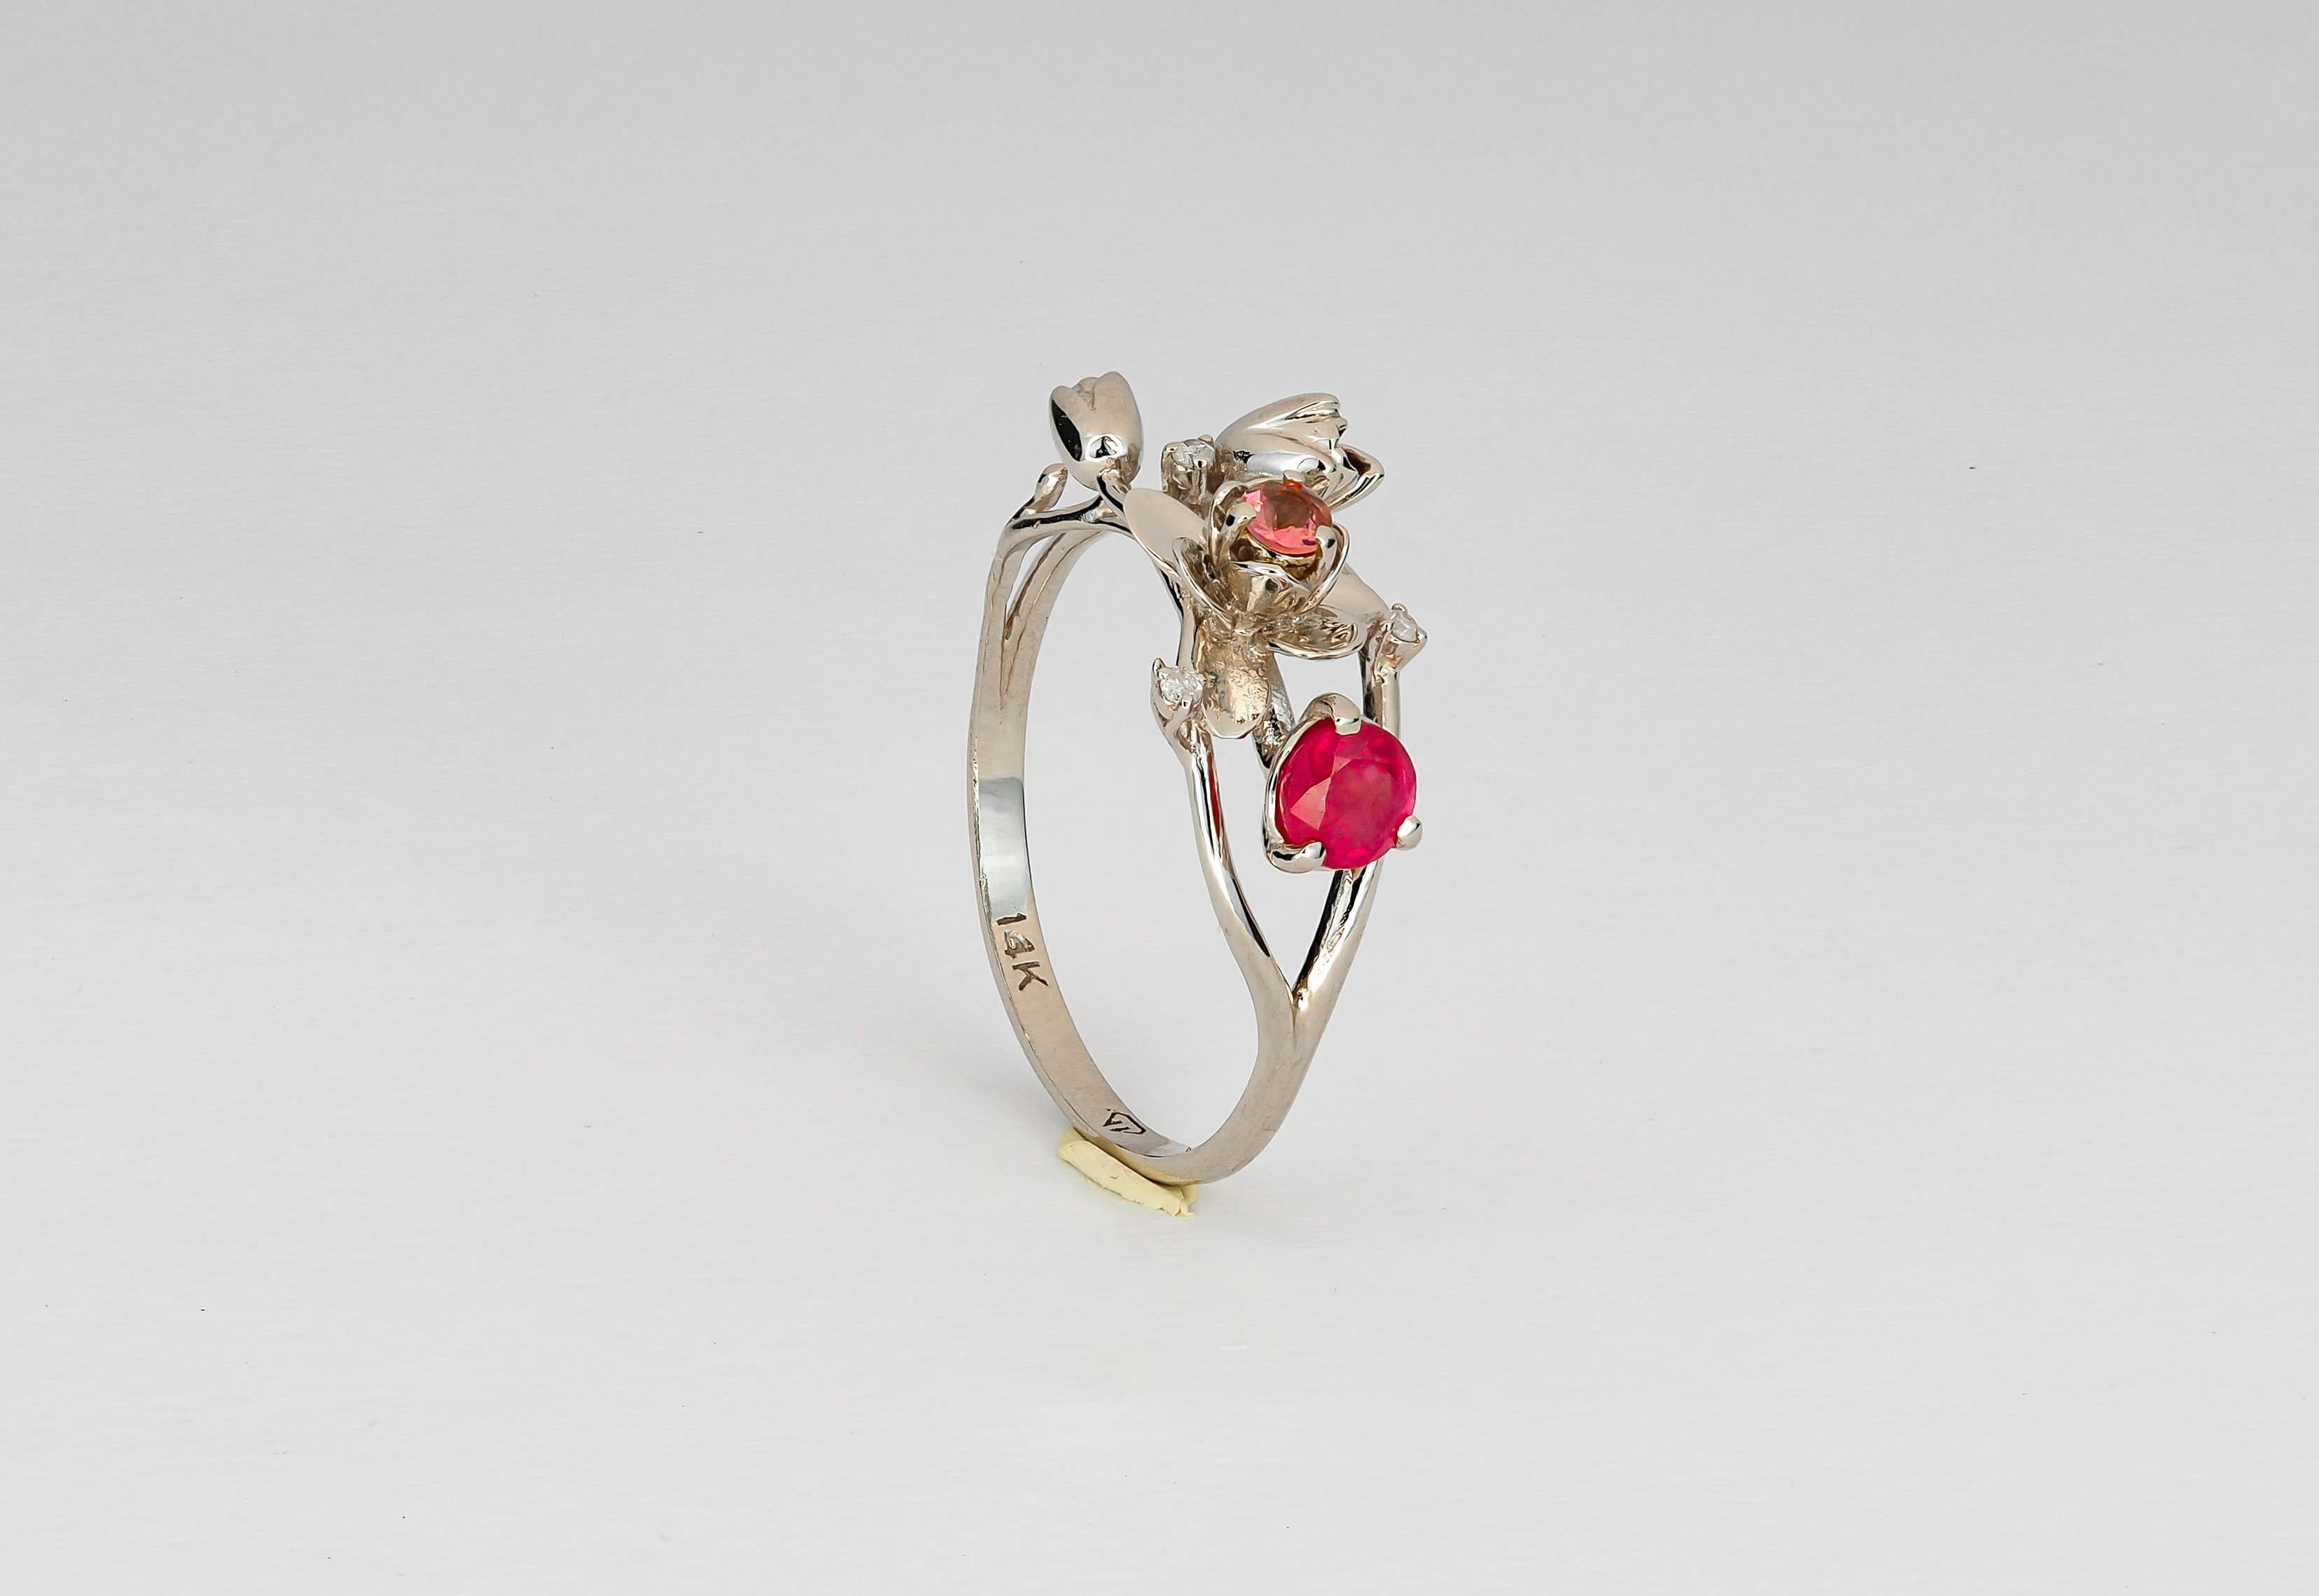 For Sale:  14 karat gold Ring with Ruby and Diamonds. Orchid flower Gold Ring 2